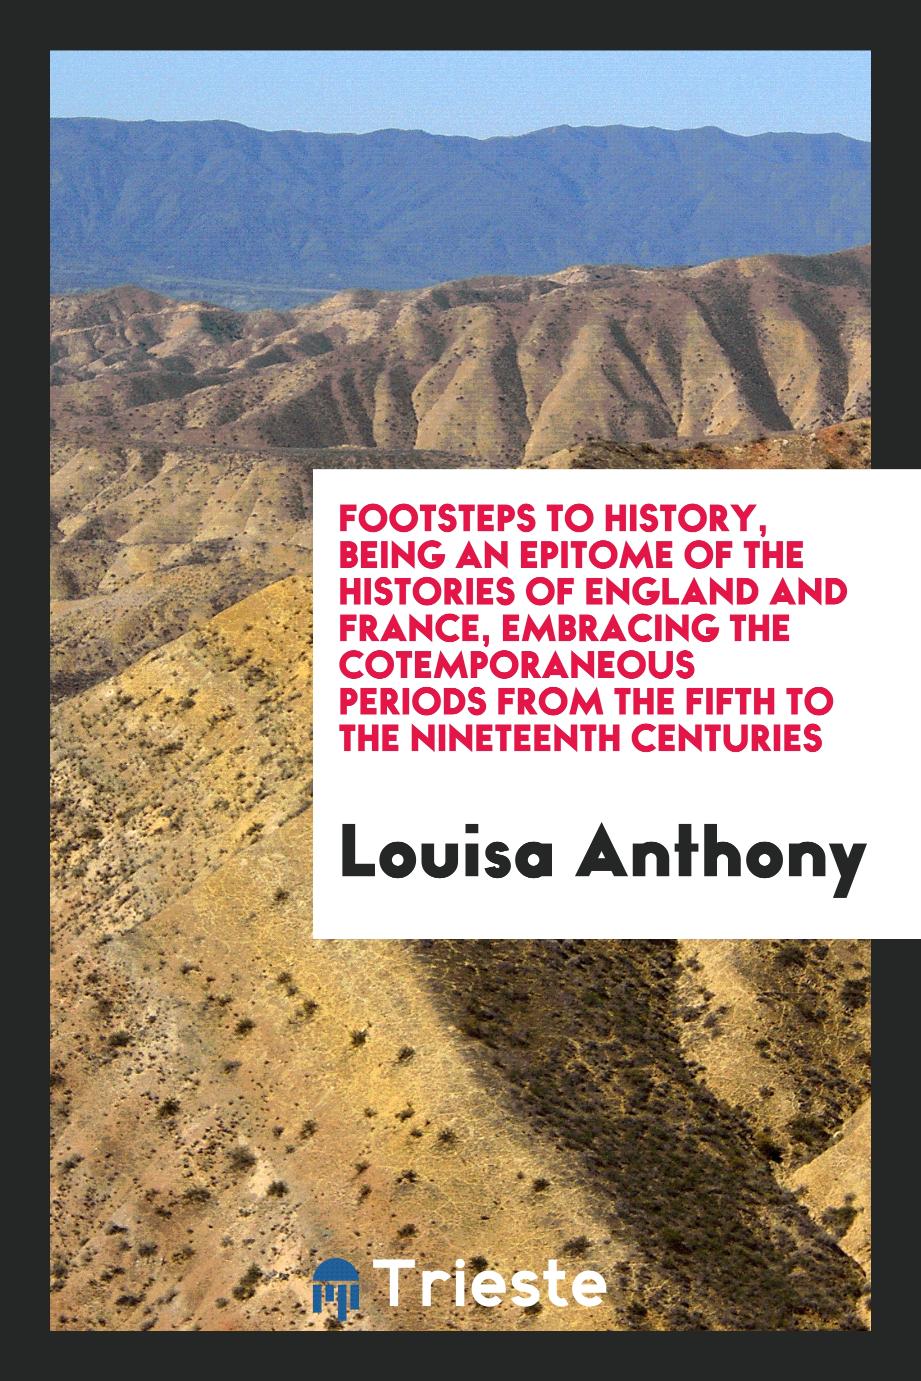 Footsteps to History, being an Epitome of the Histories of England and France, Embracing the Cotemporaneous Periods from the Fifth to the Nineteenth Centuries